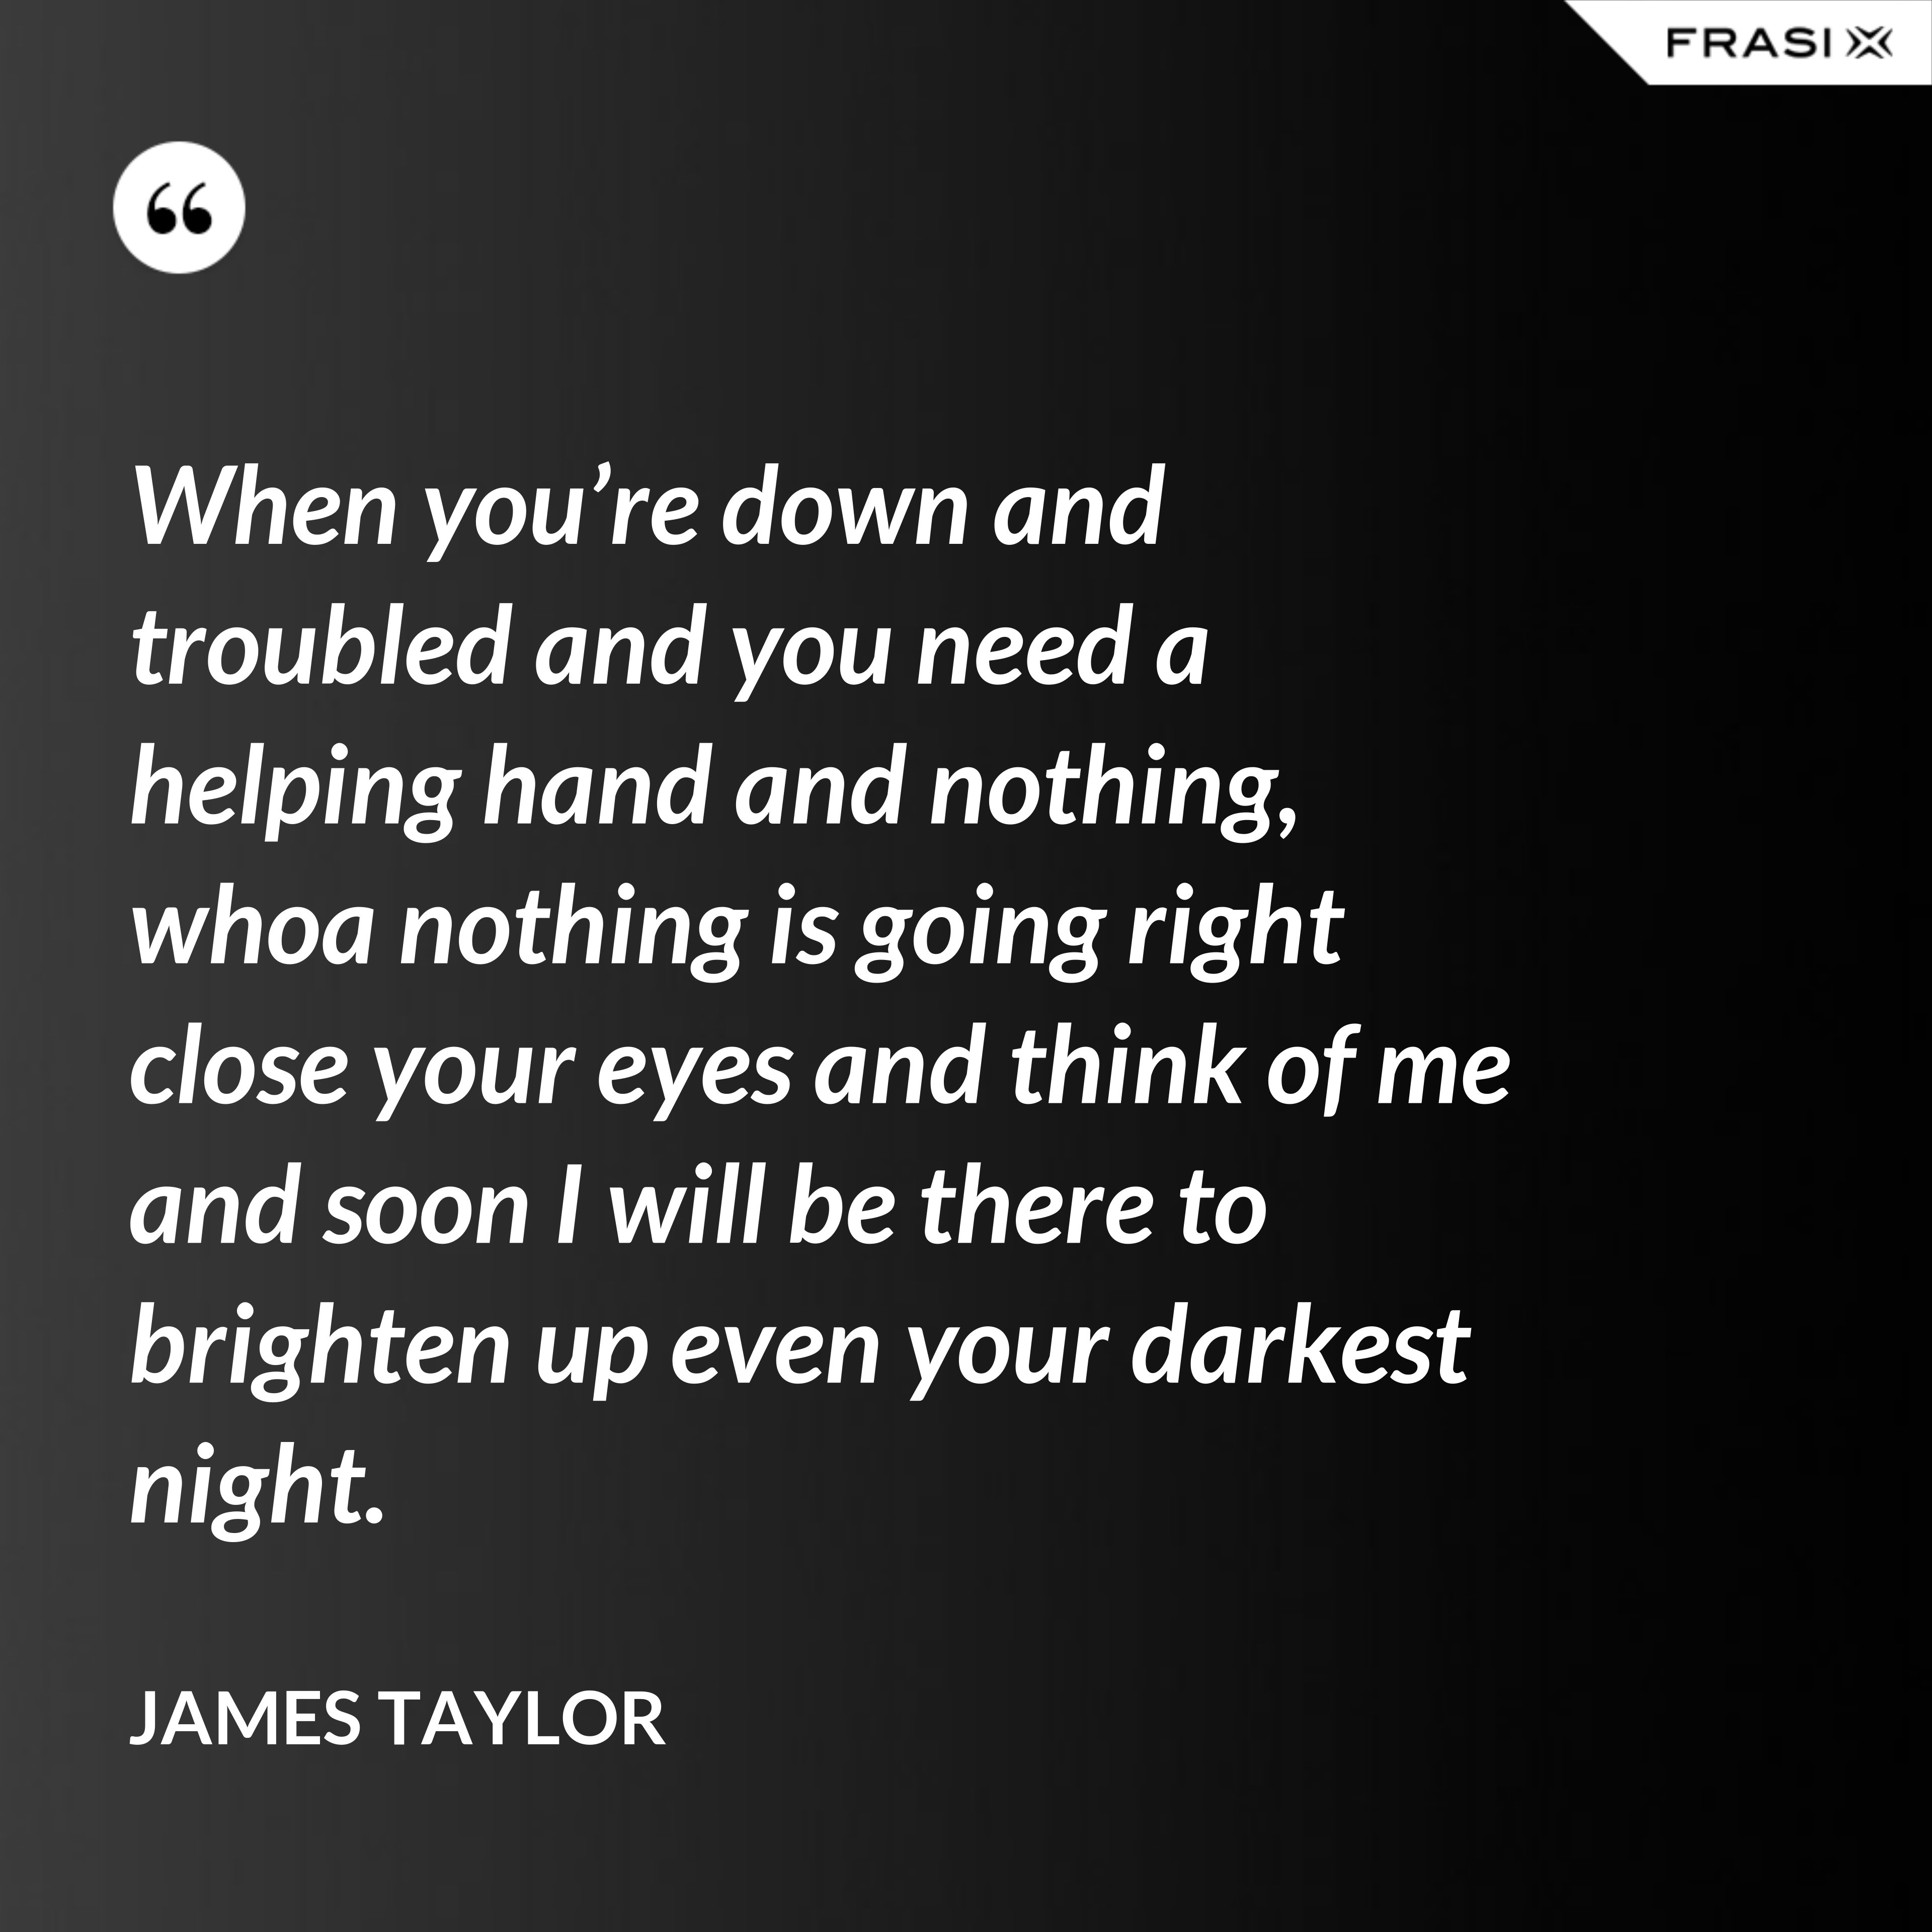 When you’re down and troubled and you need a helping hand and nothing, whoa nothing is going right close your eyes and think of me and soon I will be there to brighten up even your darkest night. - James Taylor